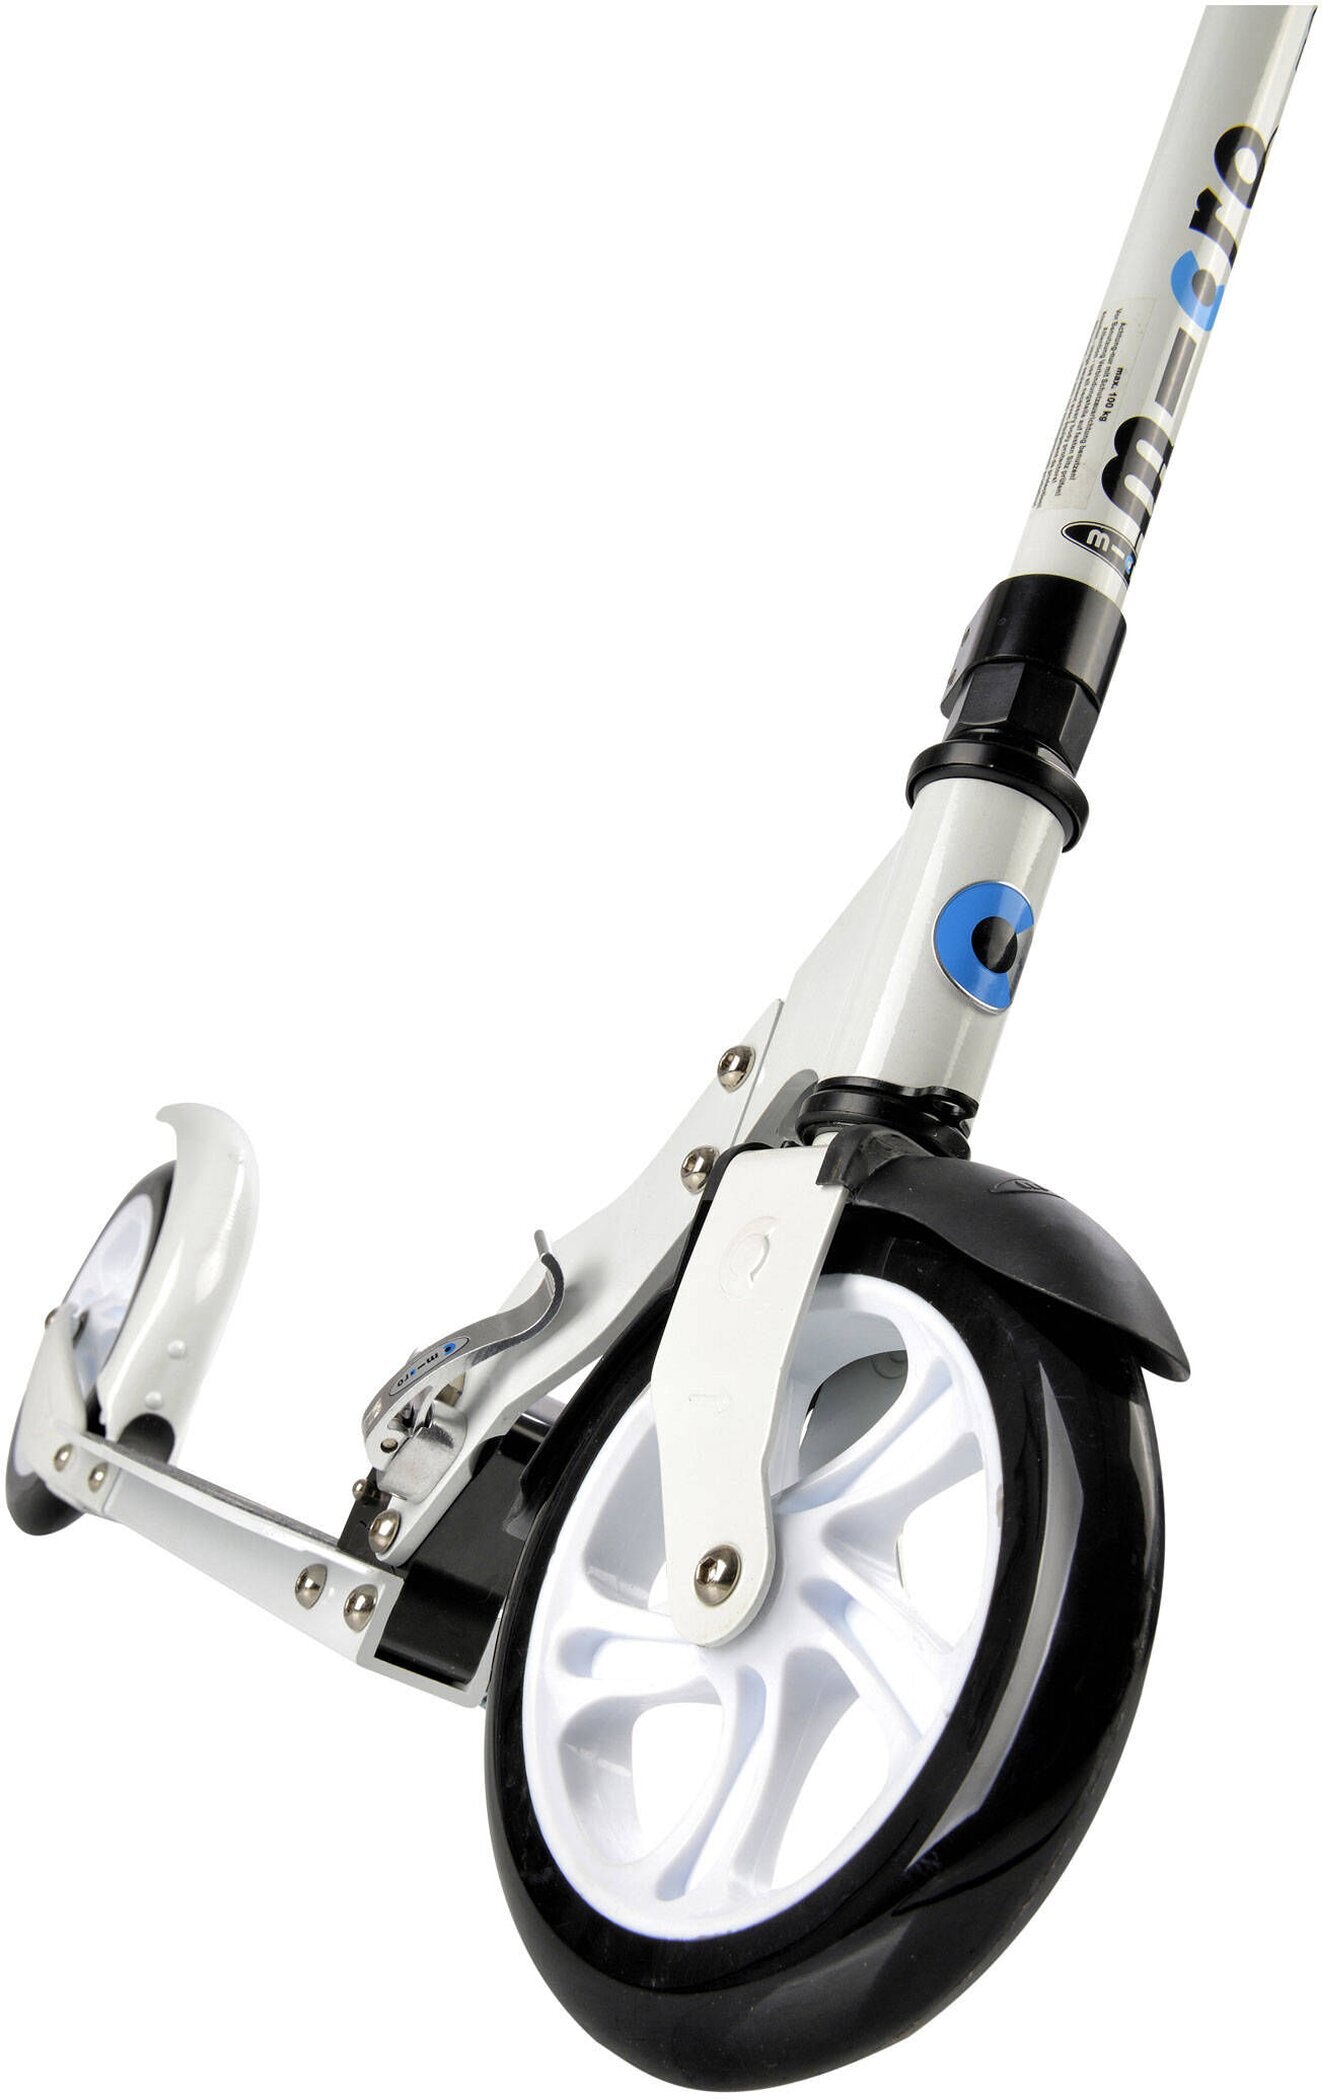 MICRO Roller/ Scooter White